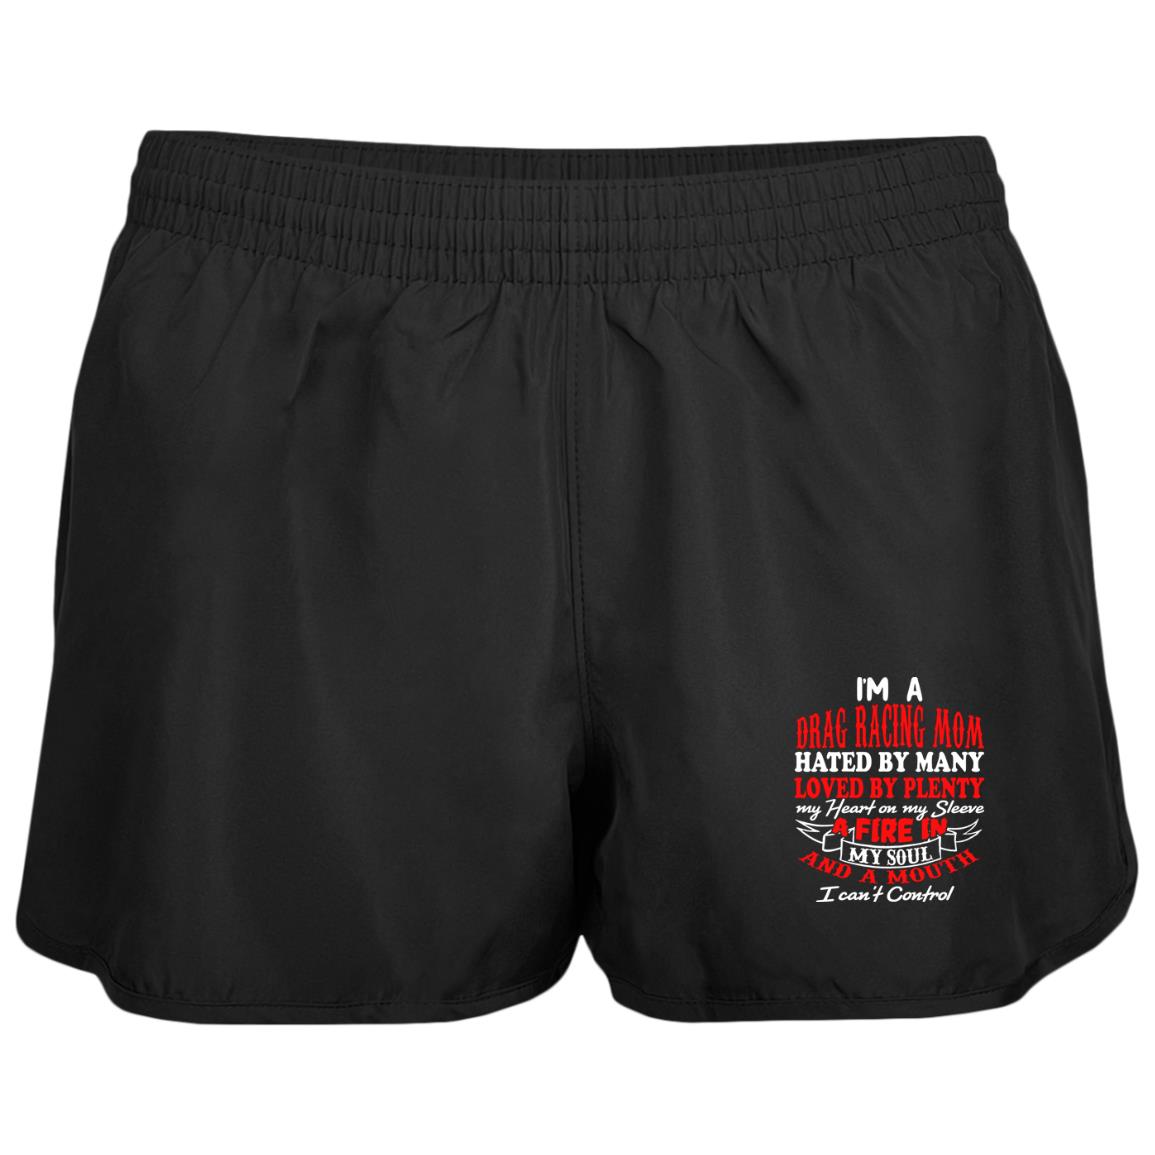 I'm A Drag Racing Mom Hated By Many Loved By Plenty Ladies' Wayfarer Running Shorts